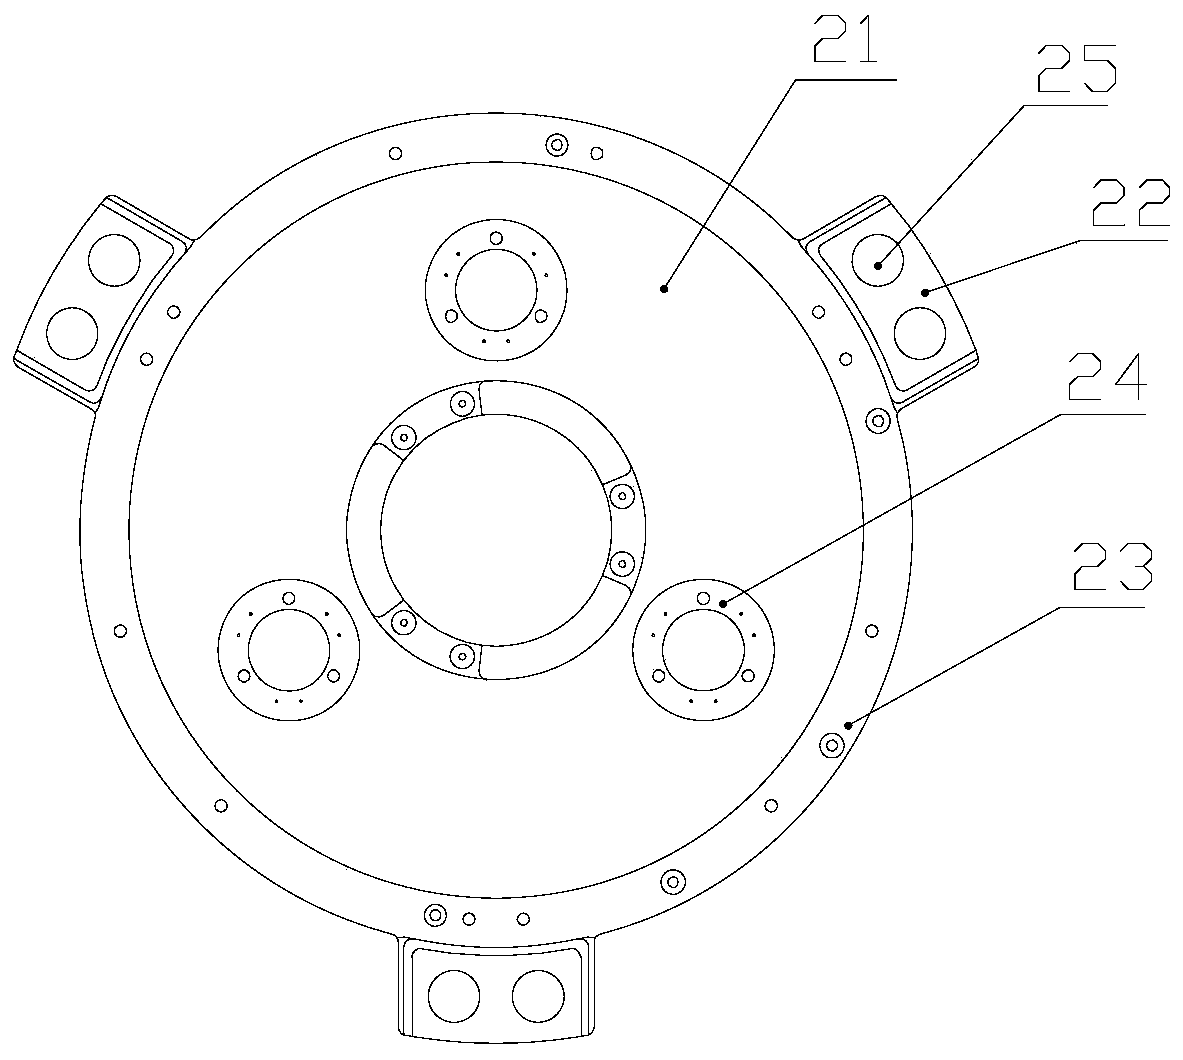 Light space camera main force-bearing device with focusing function